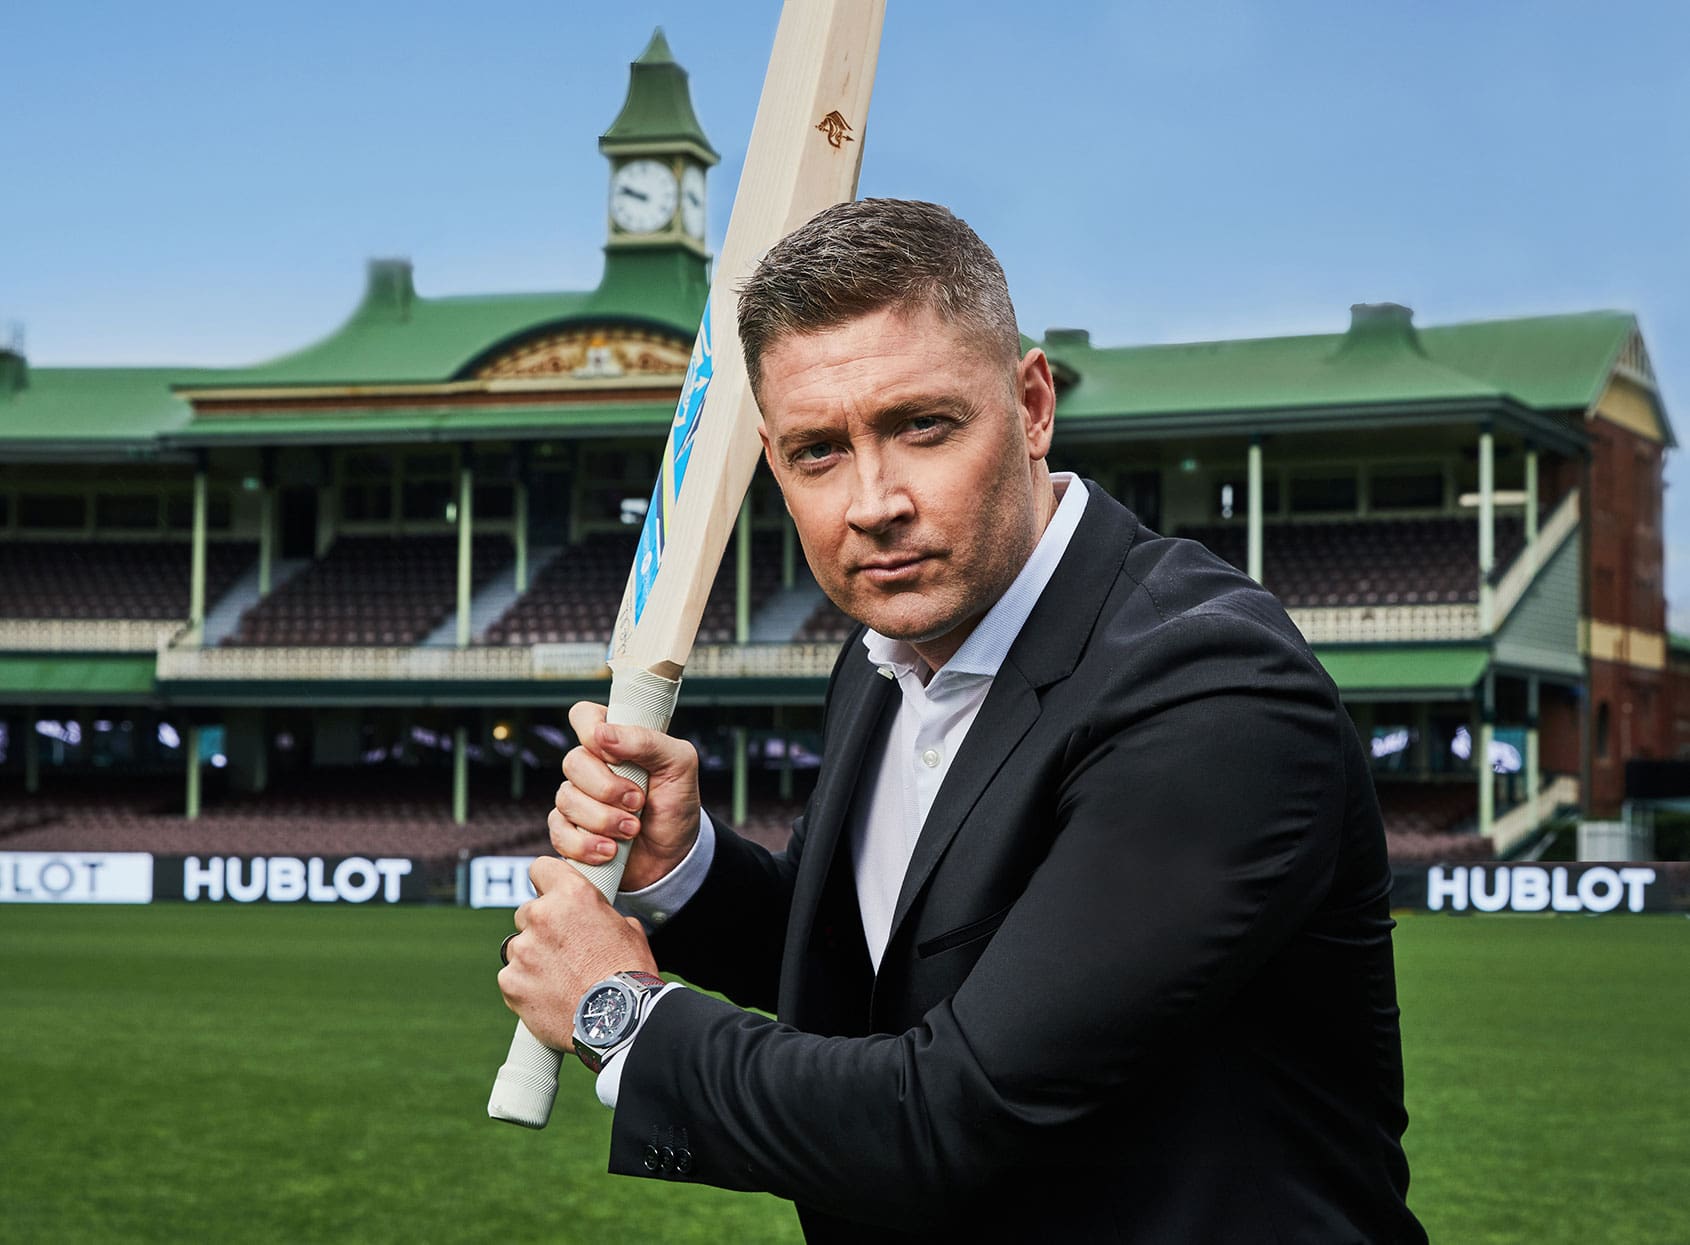 Why Hublot’s pitch at cricket is a smart play